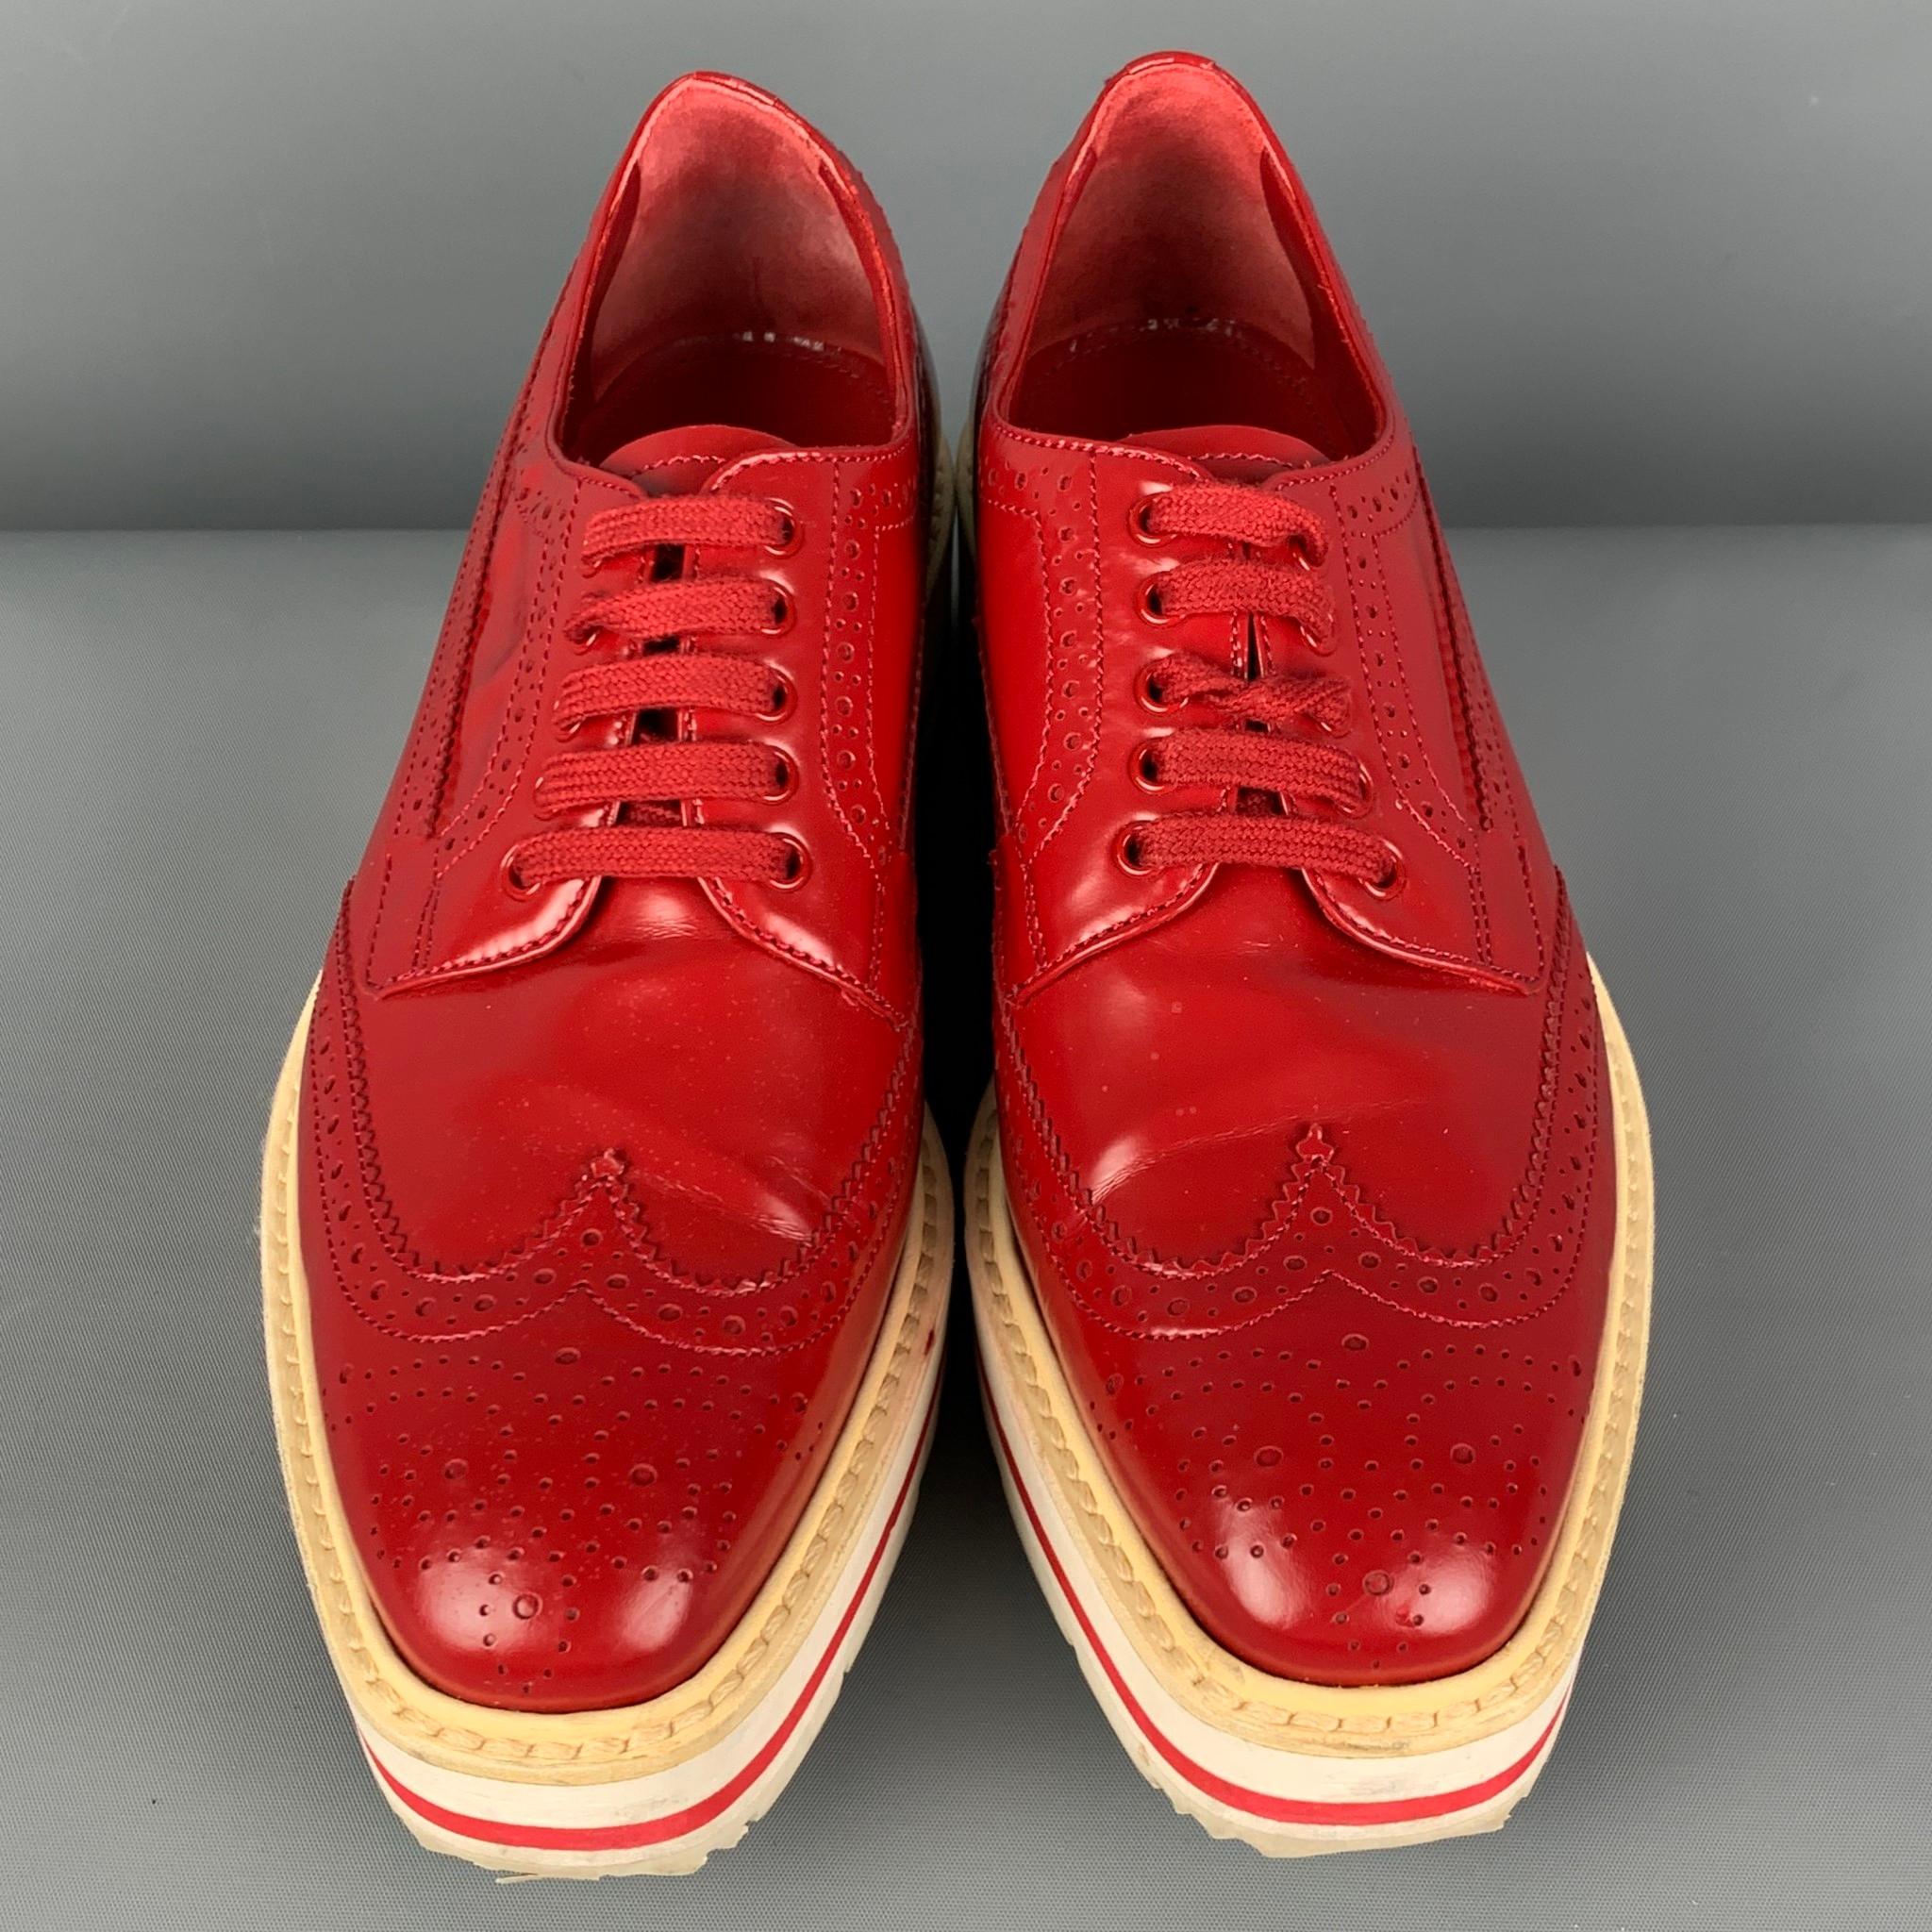 prada shoes red and white